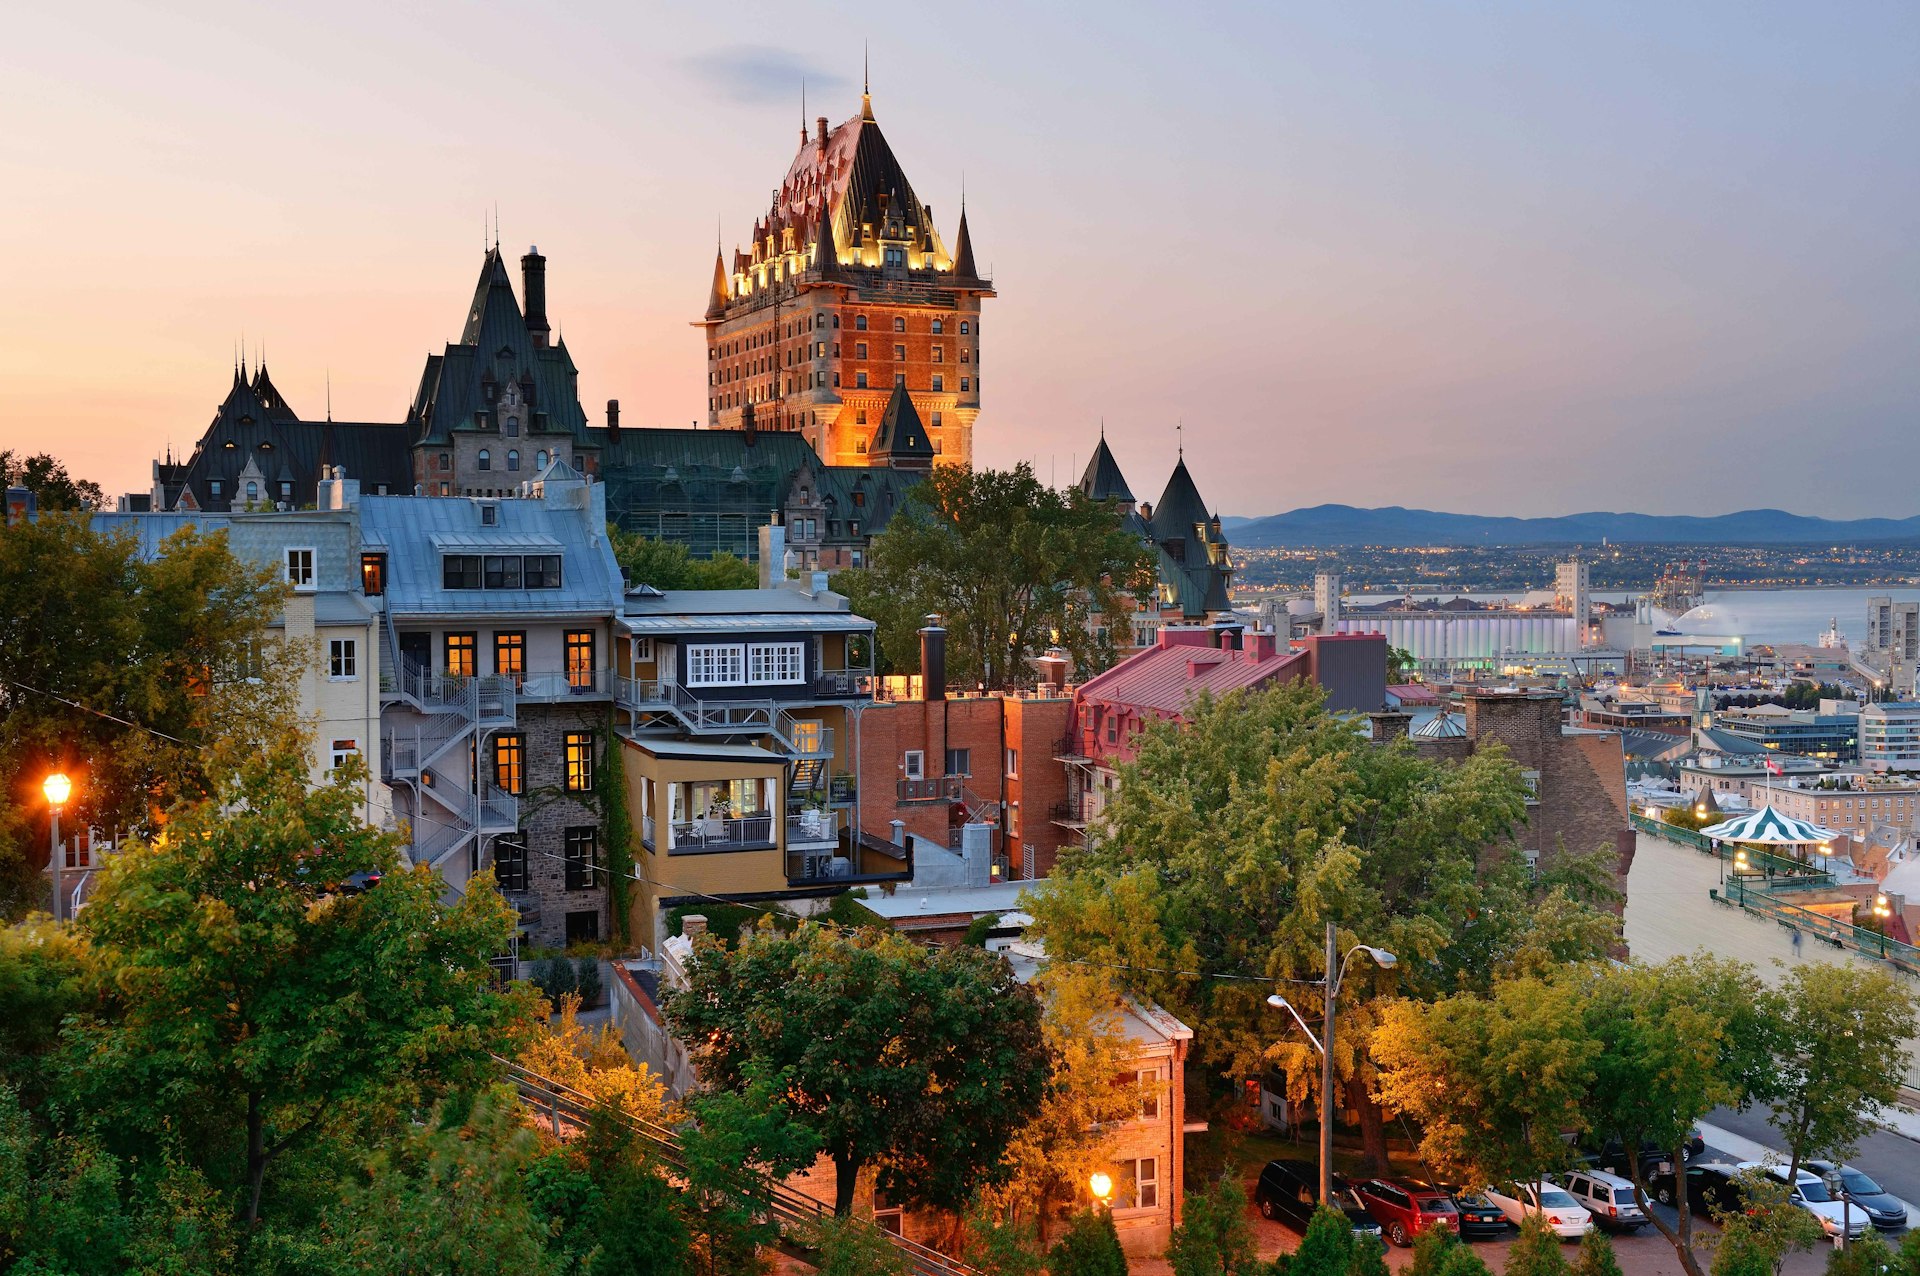 Québec City at dusk. Image by Songquan Deng / Getty